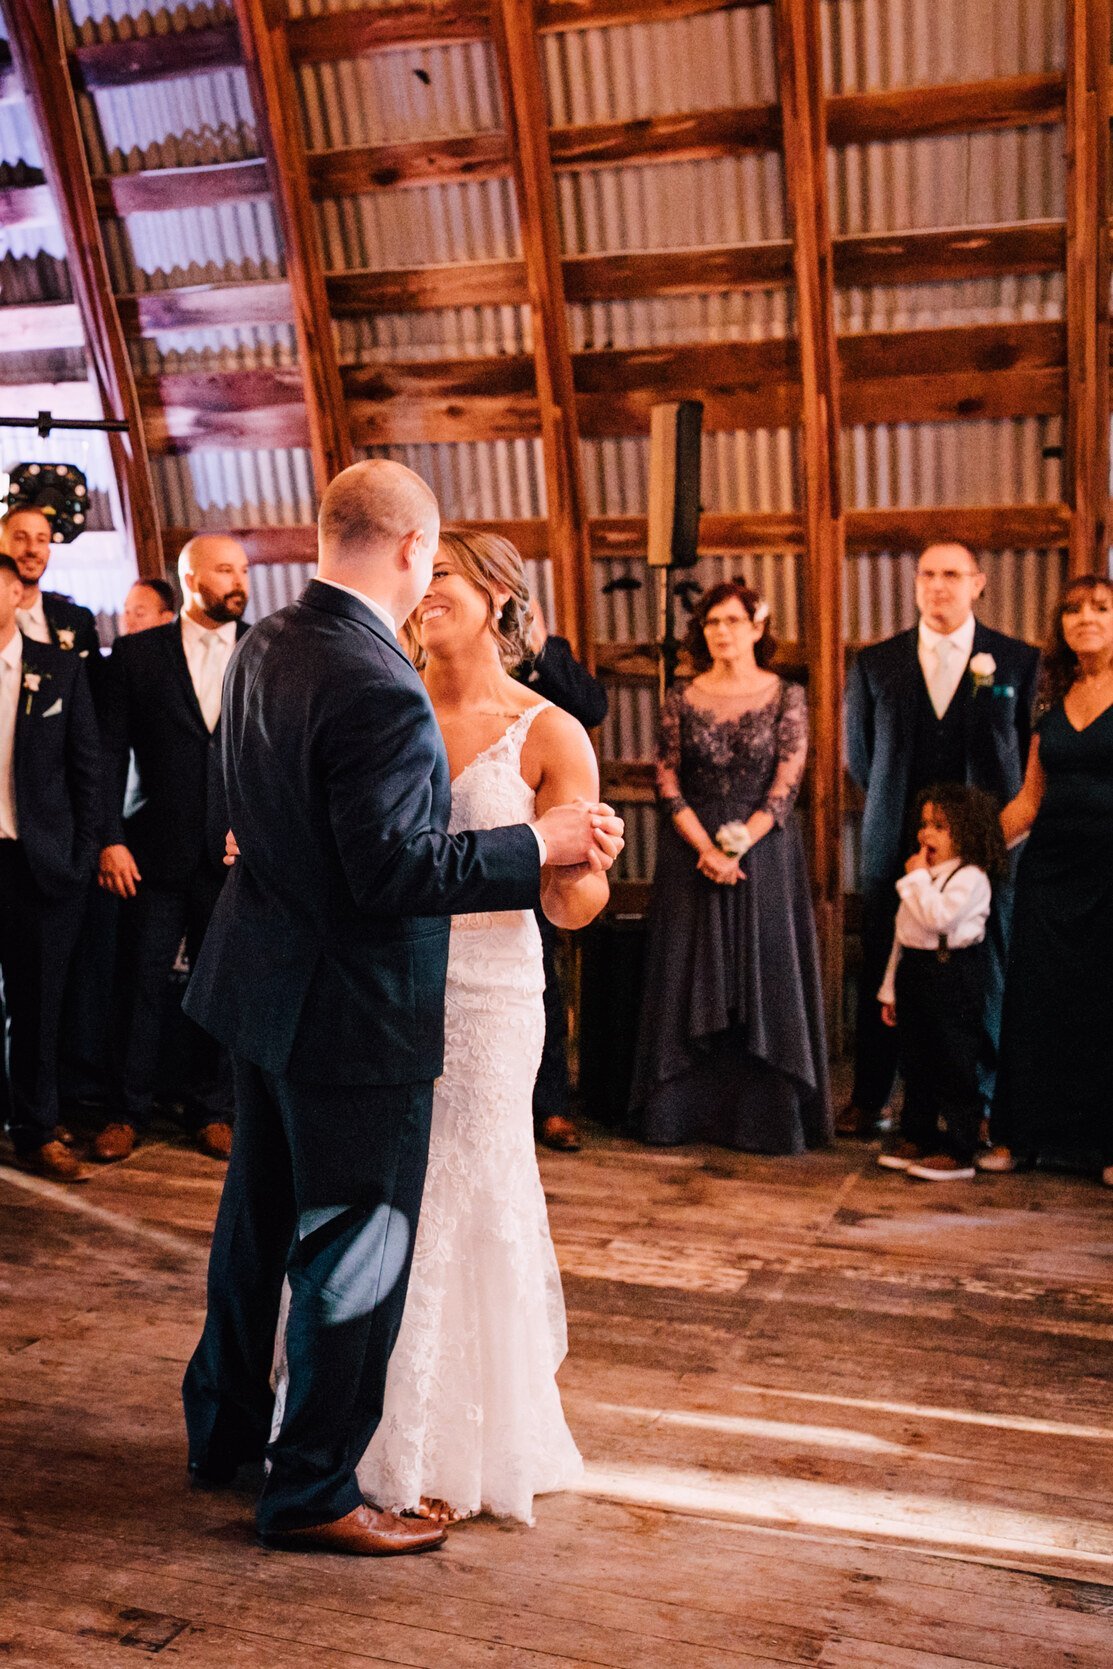  The bride and groom share their first dance at their barn wedding 